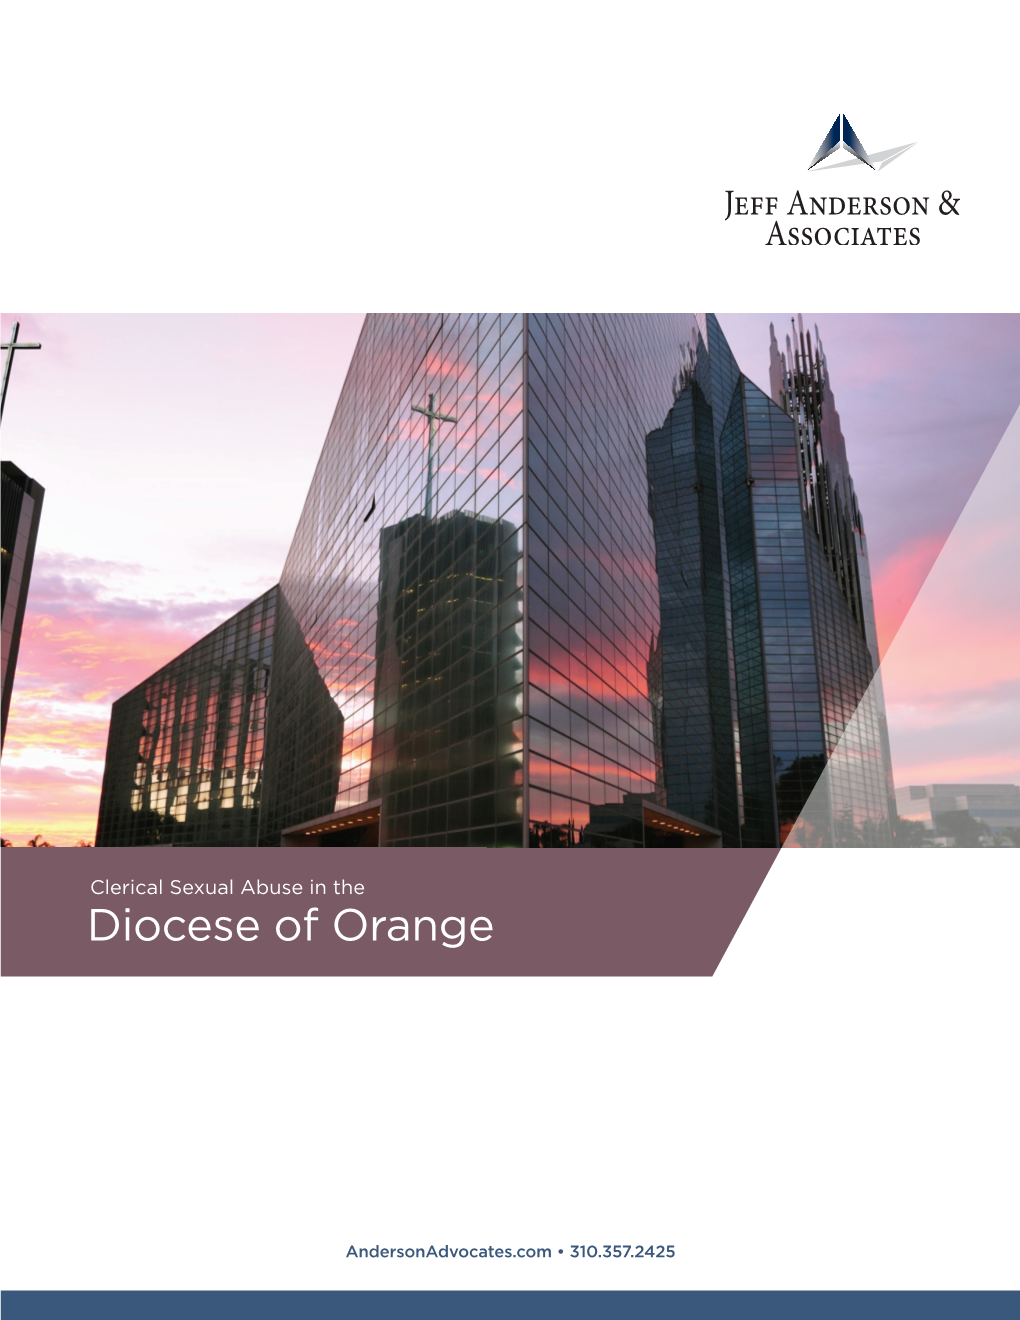 Clerical Sexual Abuse in the Diocese of Orange